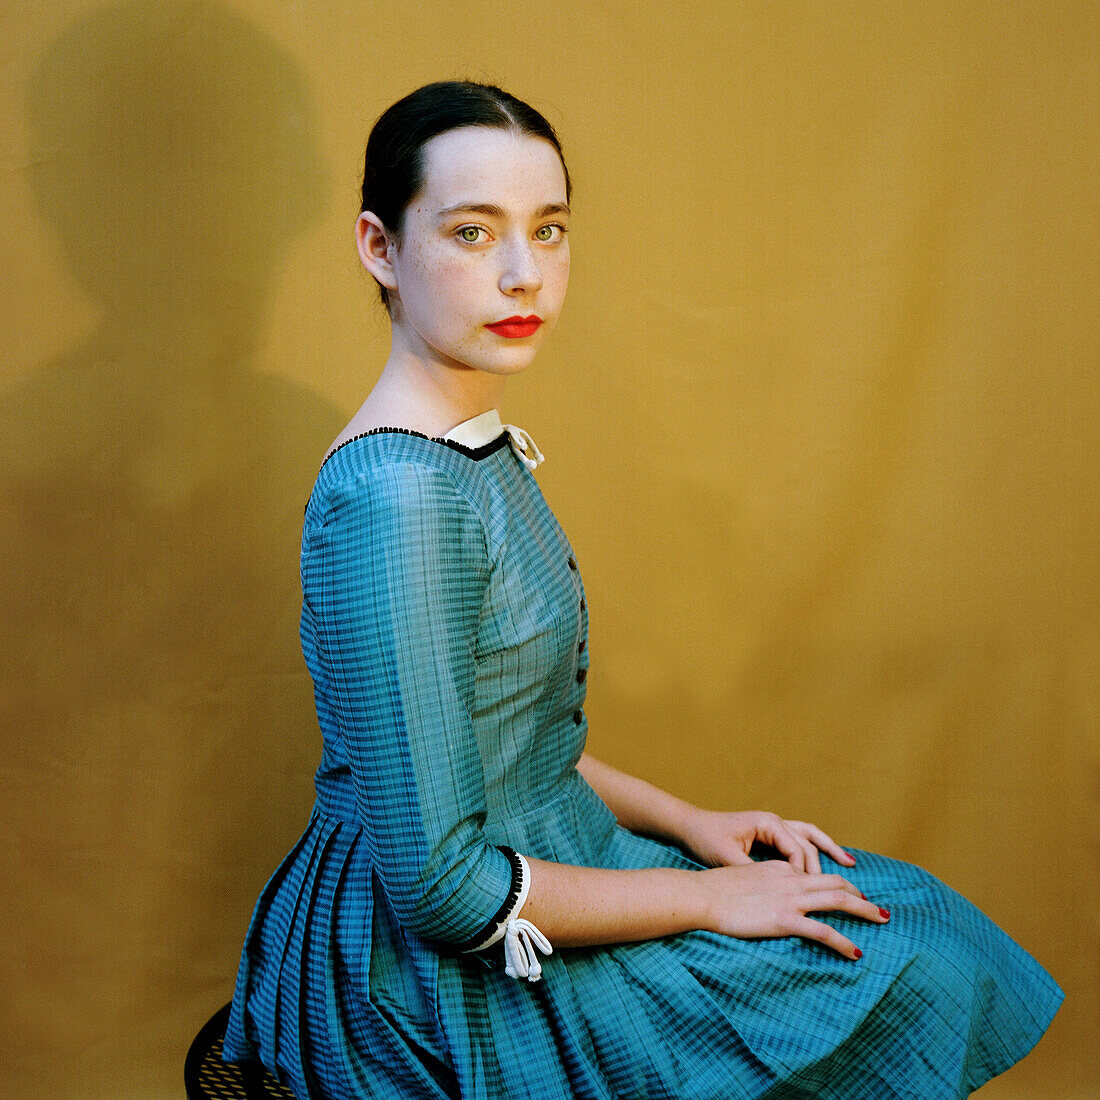 Serious Teenage Girl with Red Lips in Blue Dress, Portrait